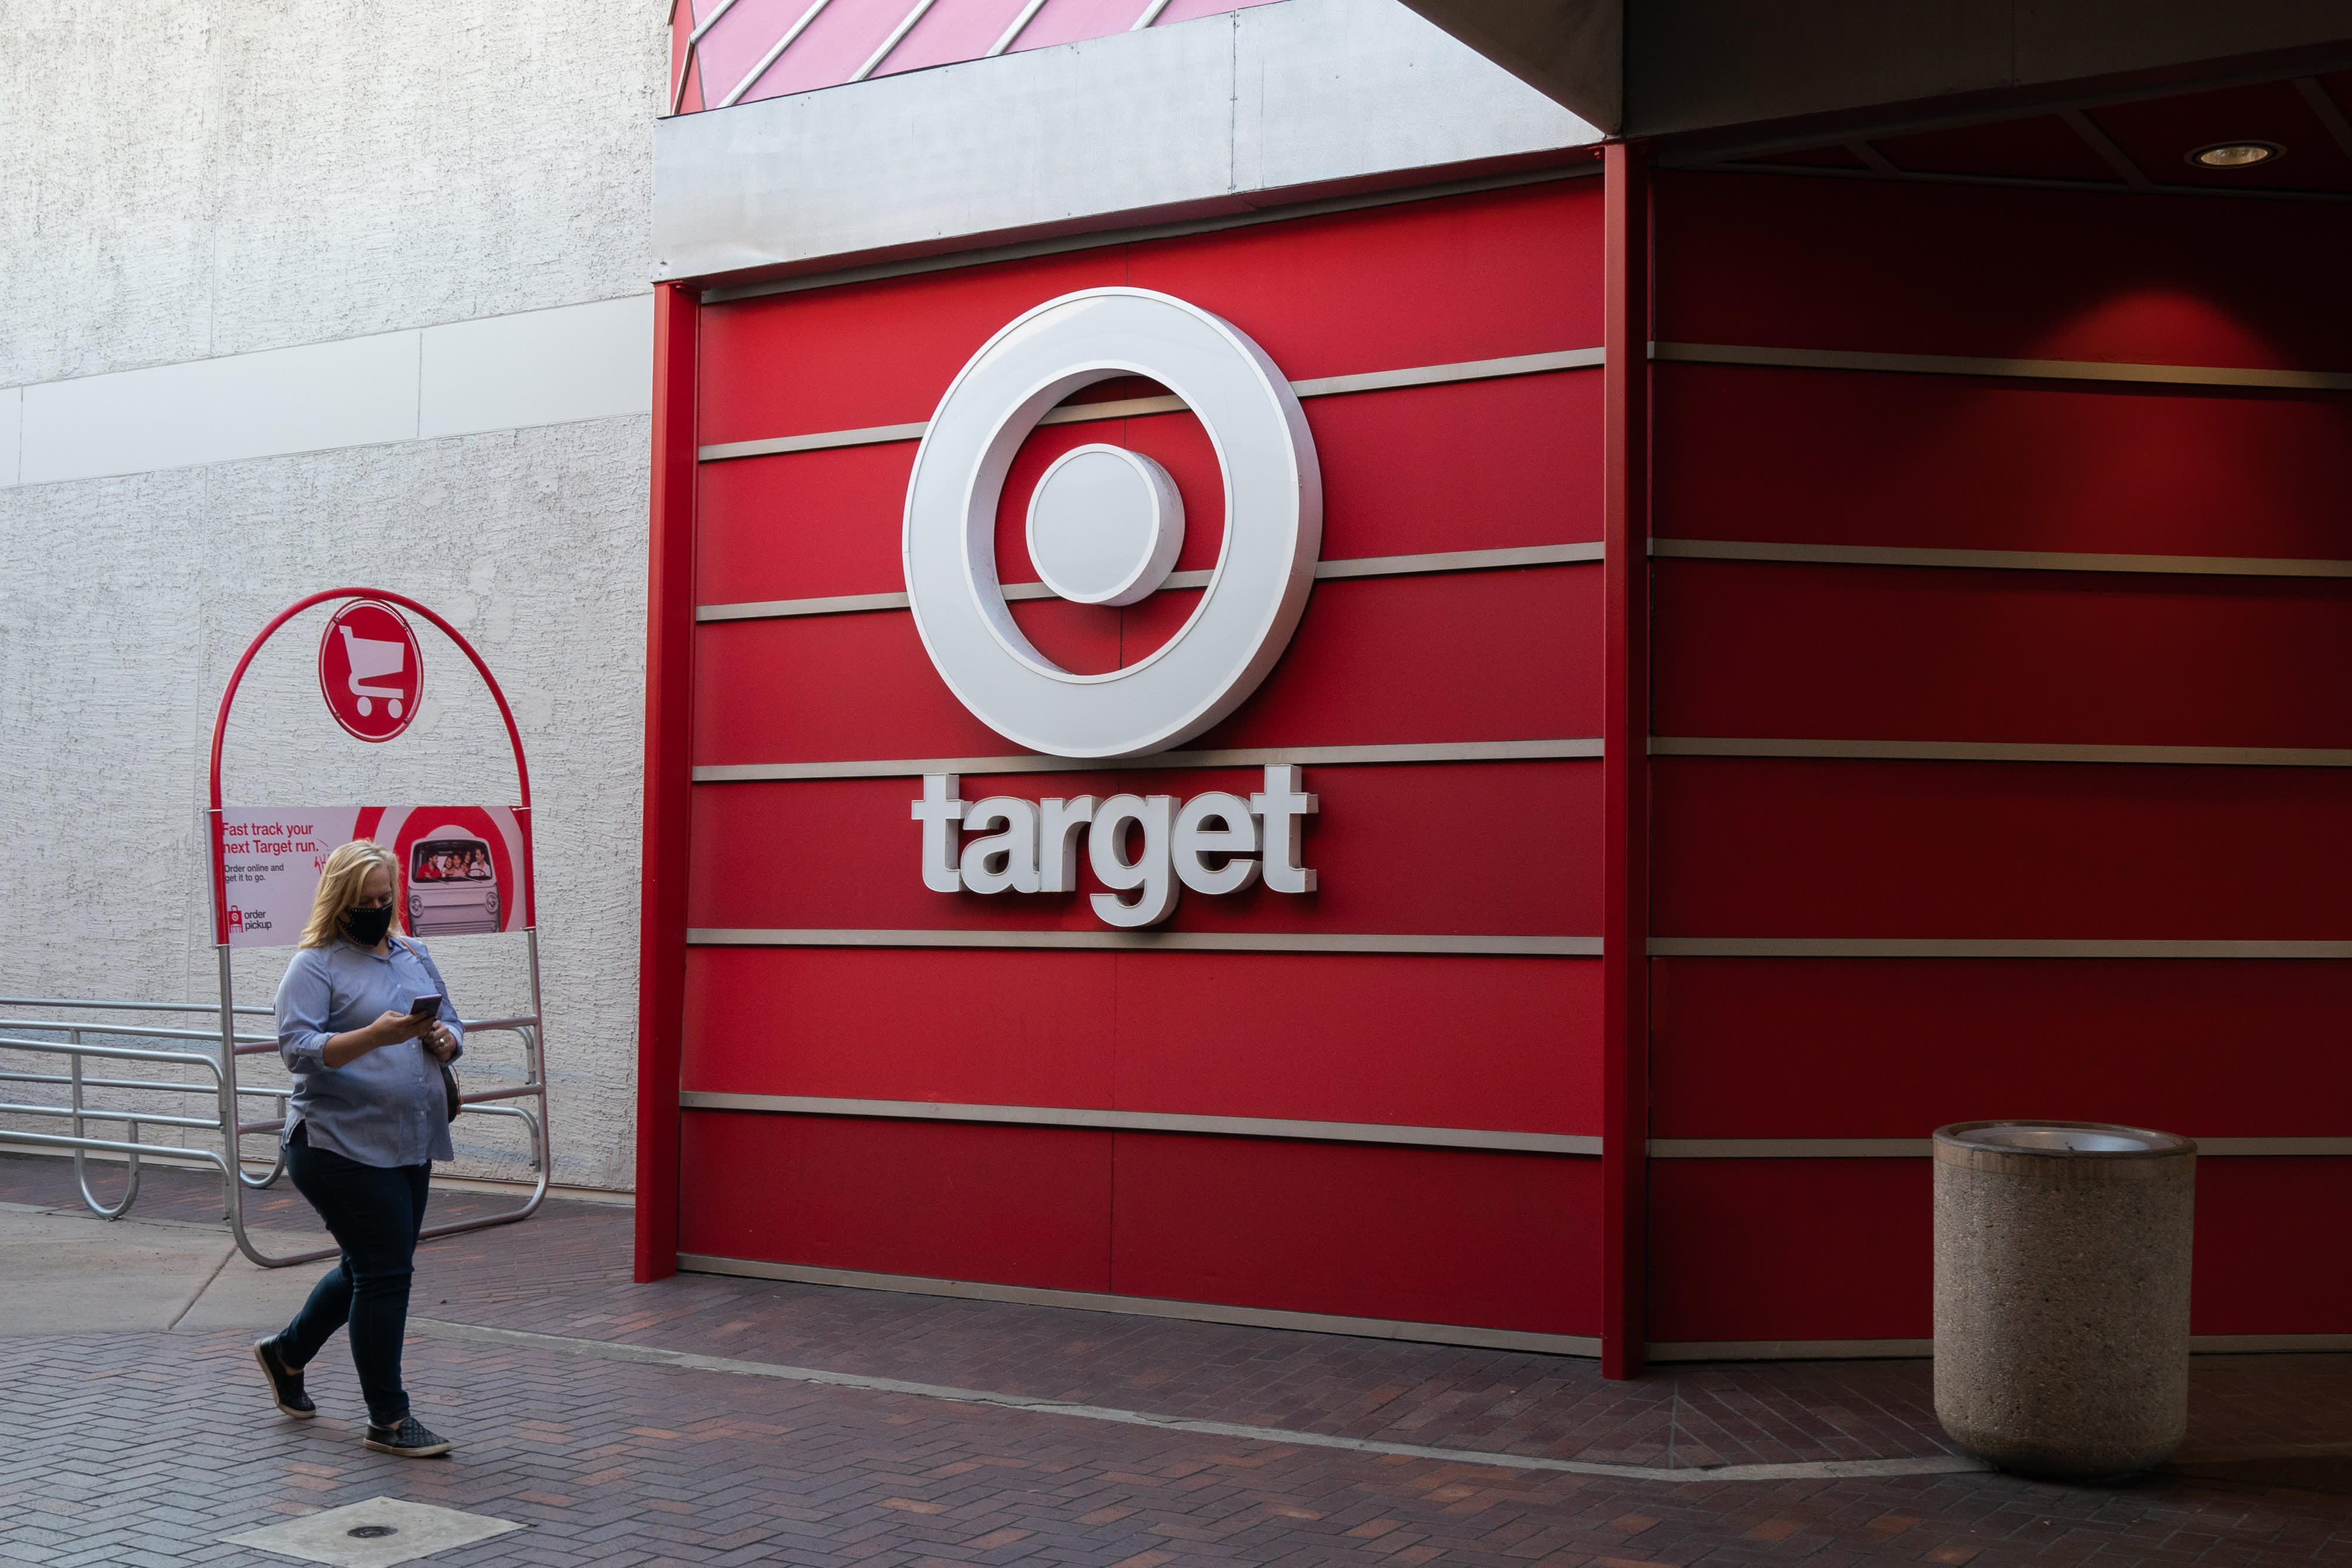 target to invest $4 billion to speed up new stores, expand supply chain